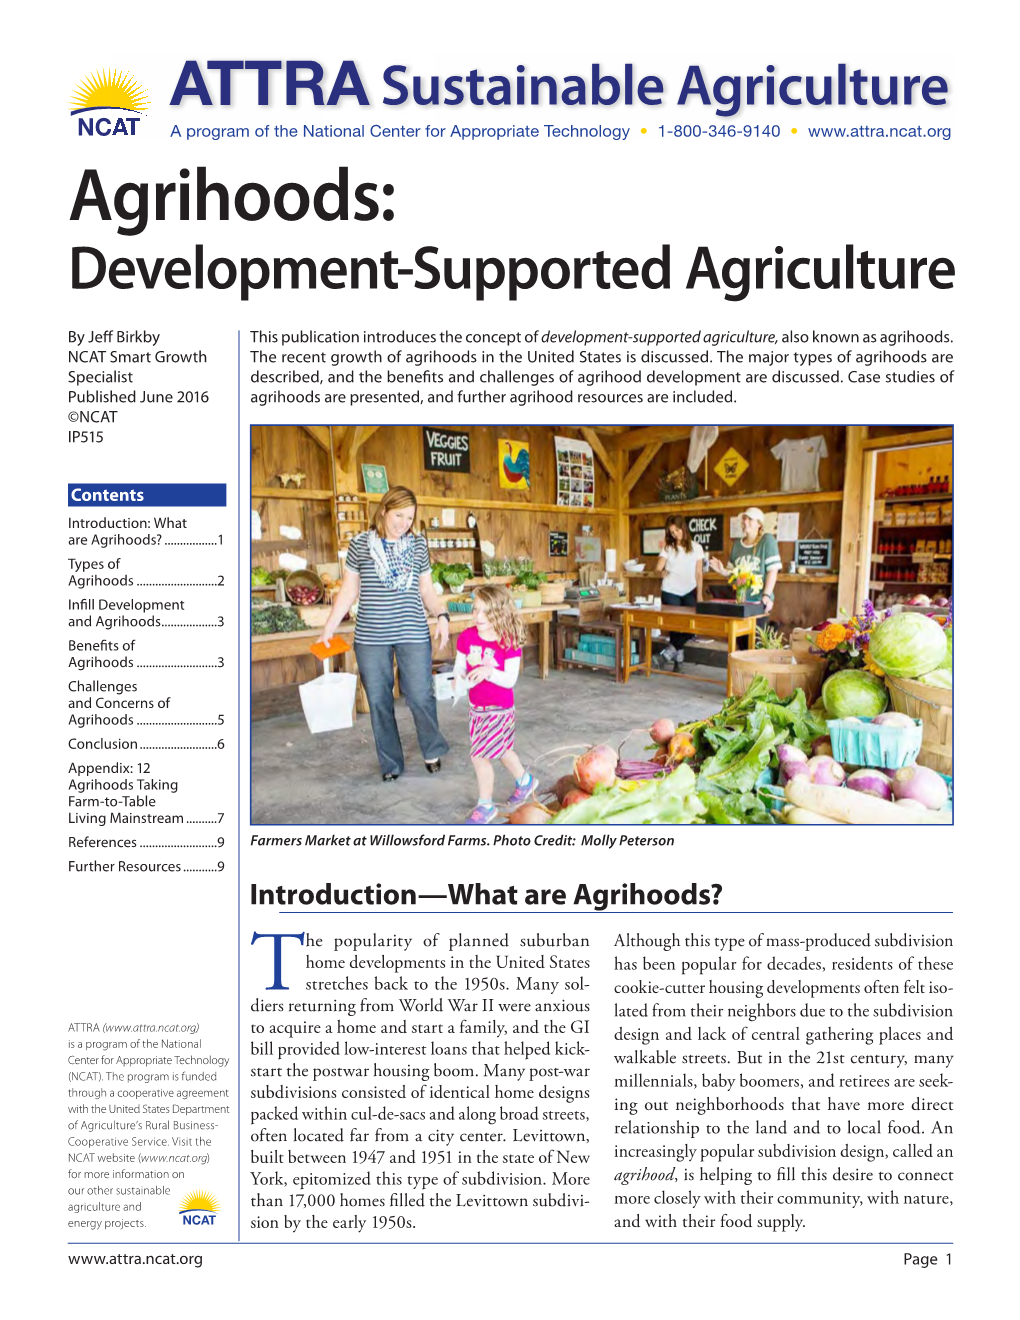 Agrihoods: Development-Supported Agriculture